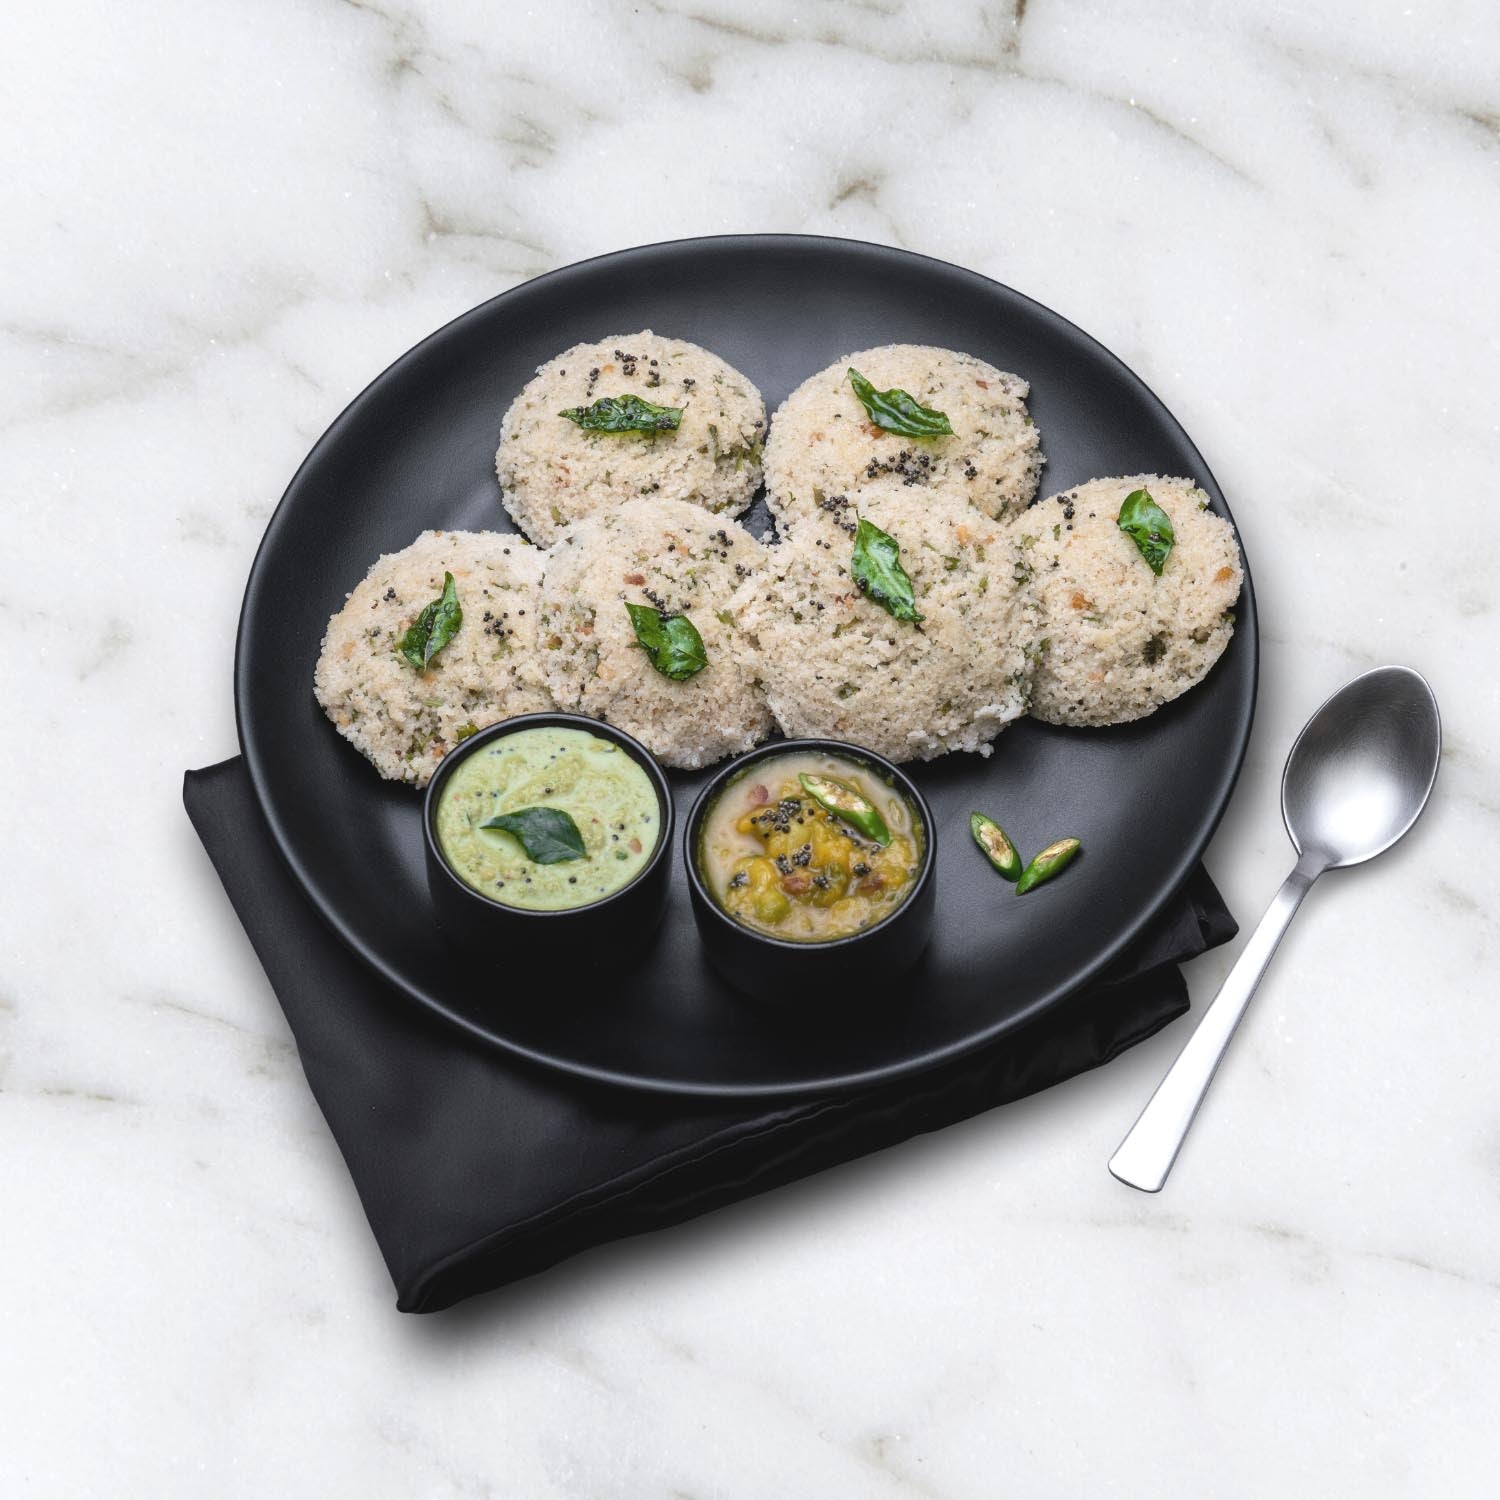 Millet Amma’s Organic Millet Rava Idli Mix- There’s nothing like Yummy Rava Idlis for breakfast.  Our Gluten-free Millet Rava Idli Mix is a nutritious and healthy breakfast full of calcium and magnesium.  Millet Amma’s Rava Idlis have a relatively low glycemic index and are a great replacement to rice idlis.